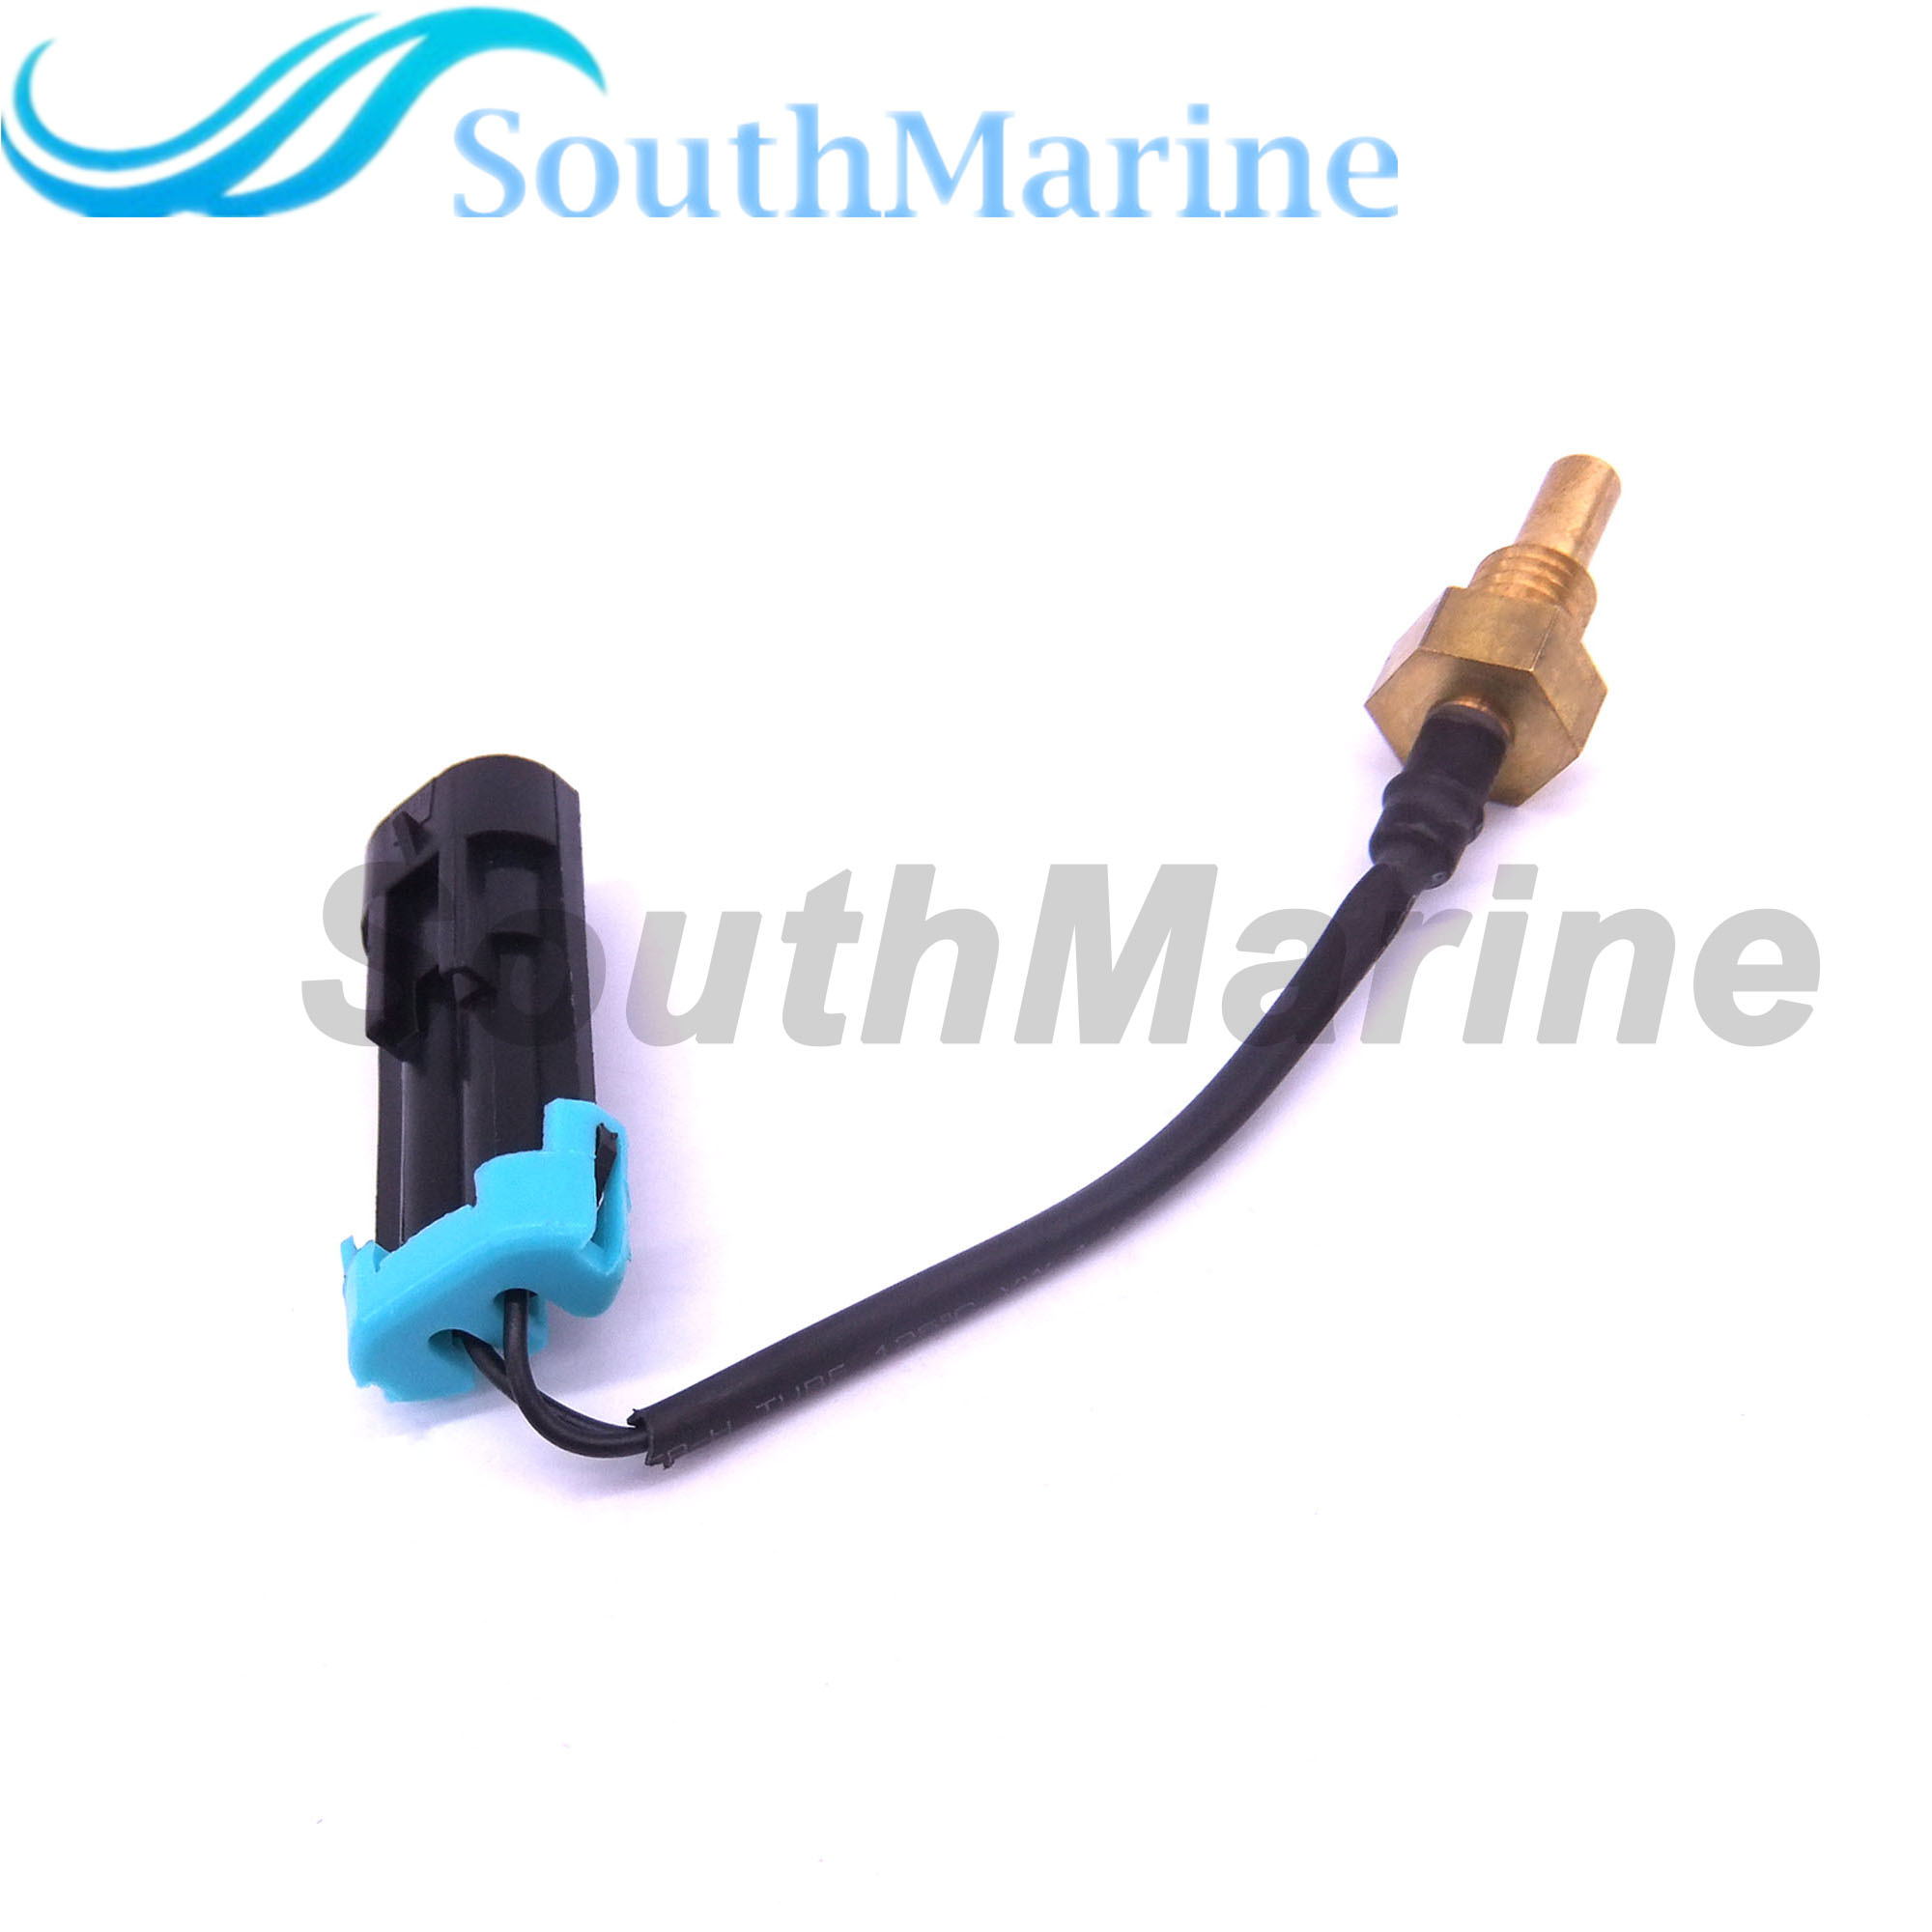 825212 825212001 825212T02 855676 855676003 855676A1 18-3541 Boat Motor Thermostat for Mercury Mariner 4-Stroke 8HP 90HP Outboard Engine 